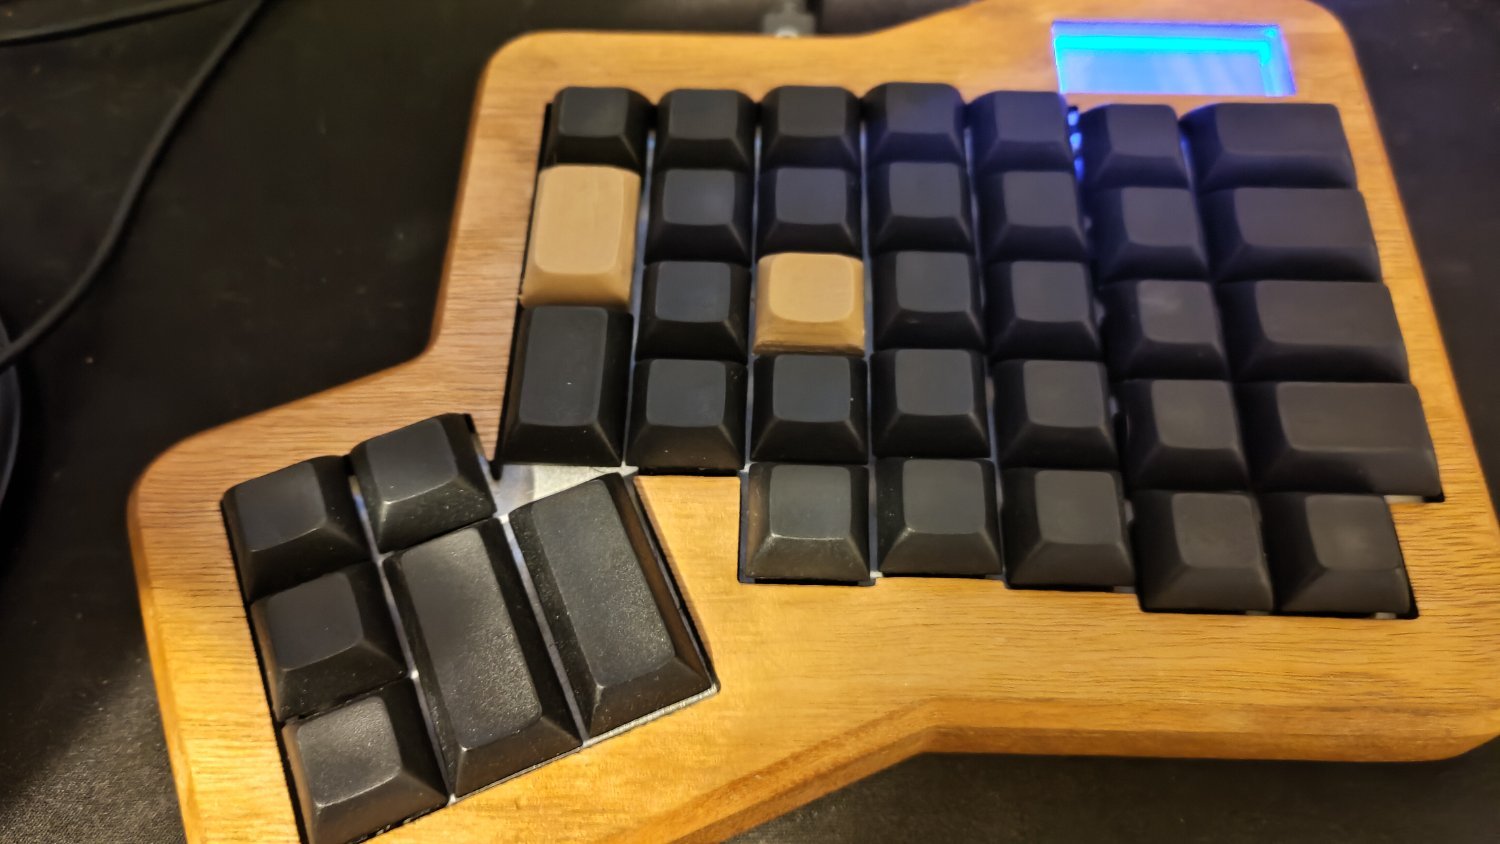 keyboard without letters or numbers on its keycaps